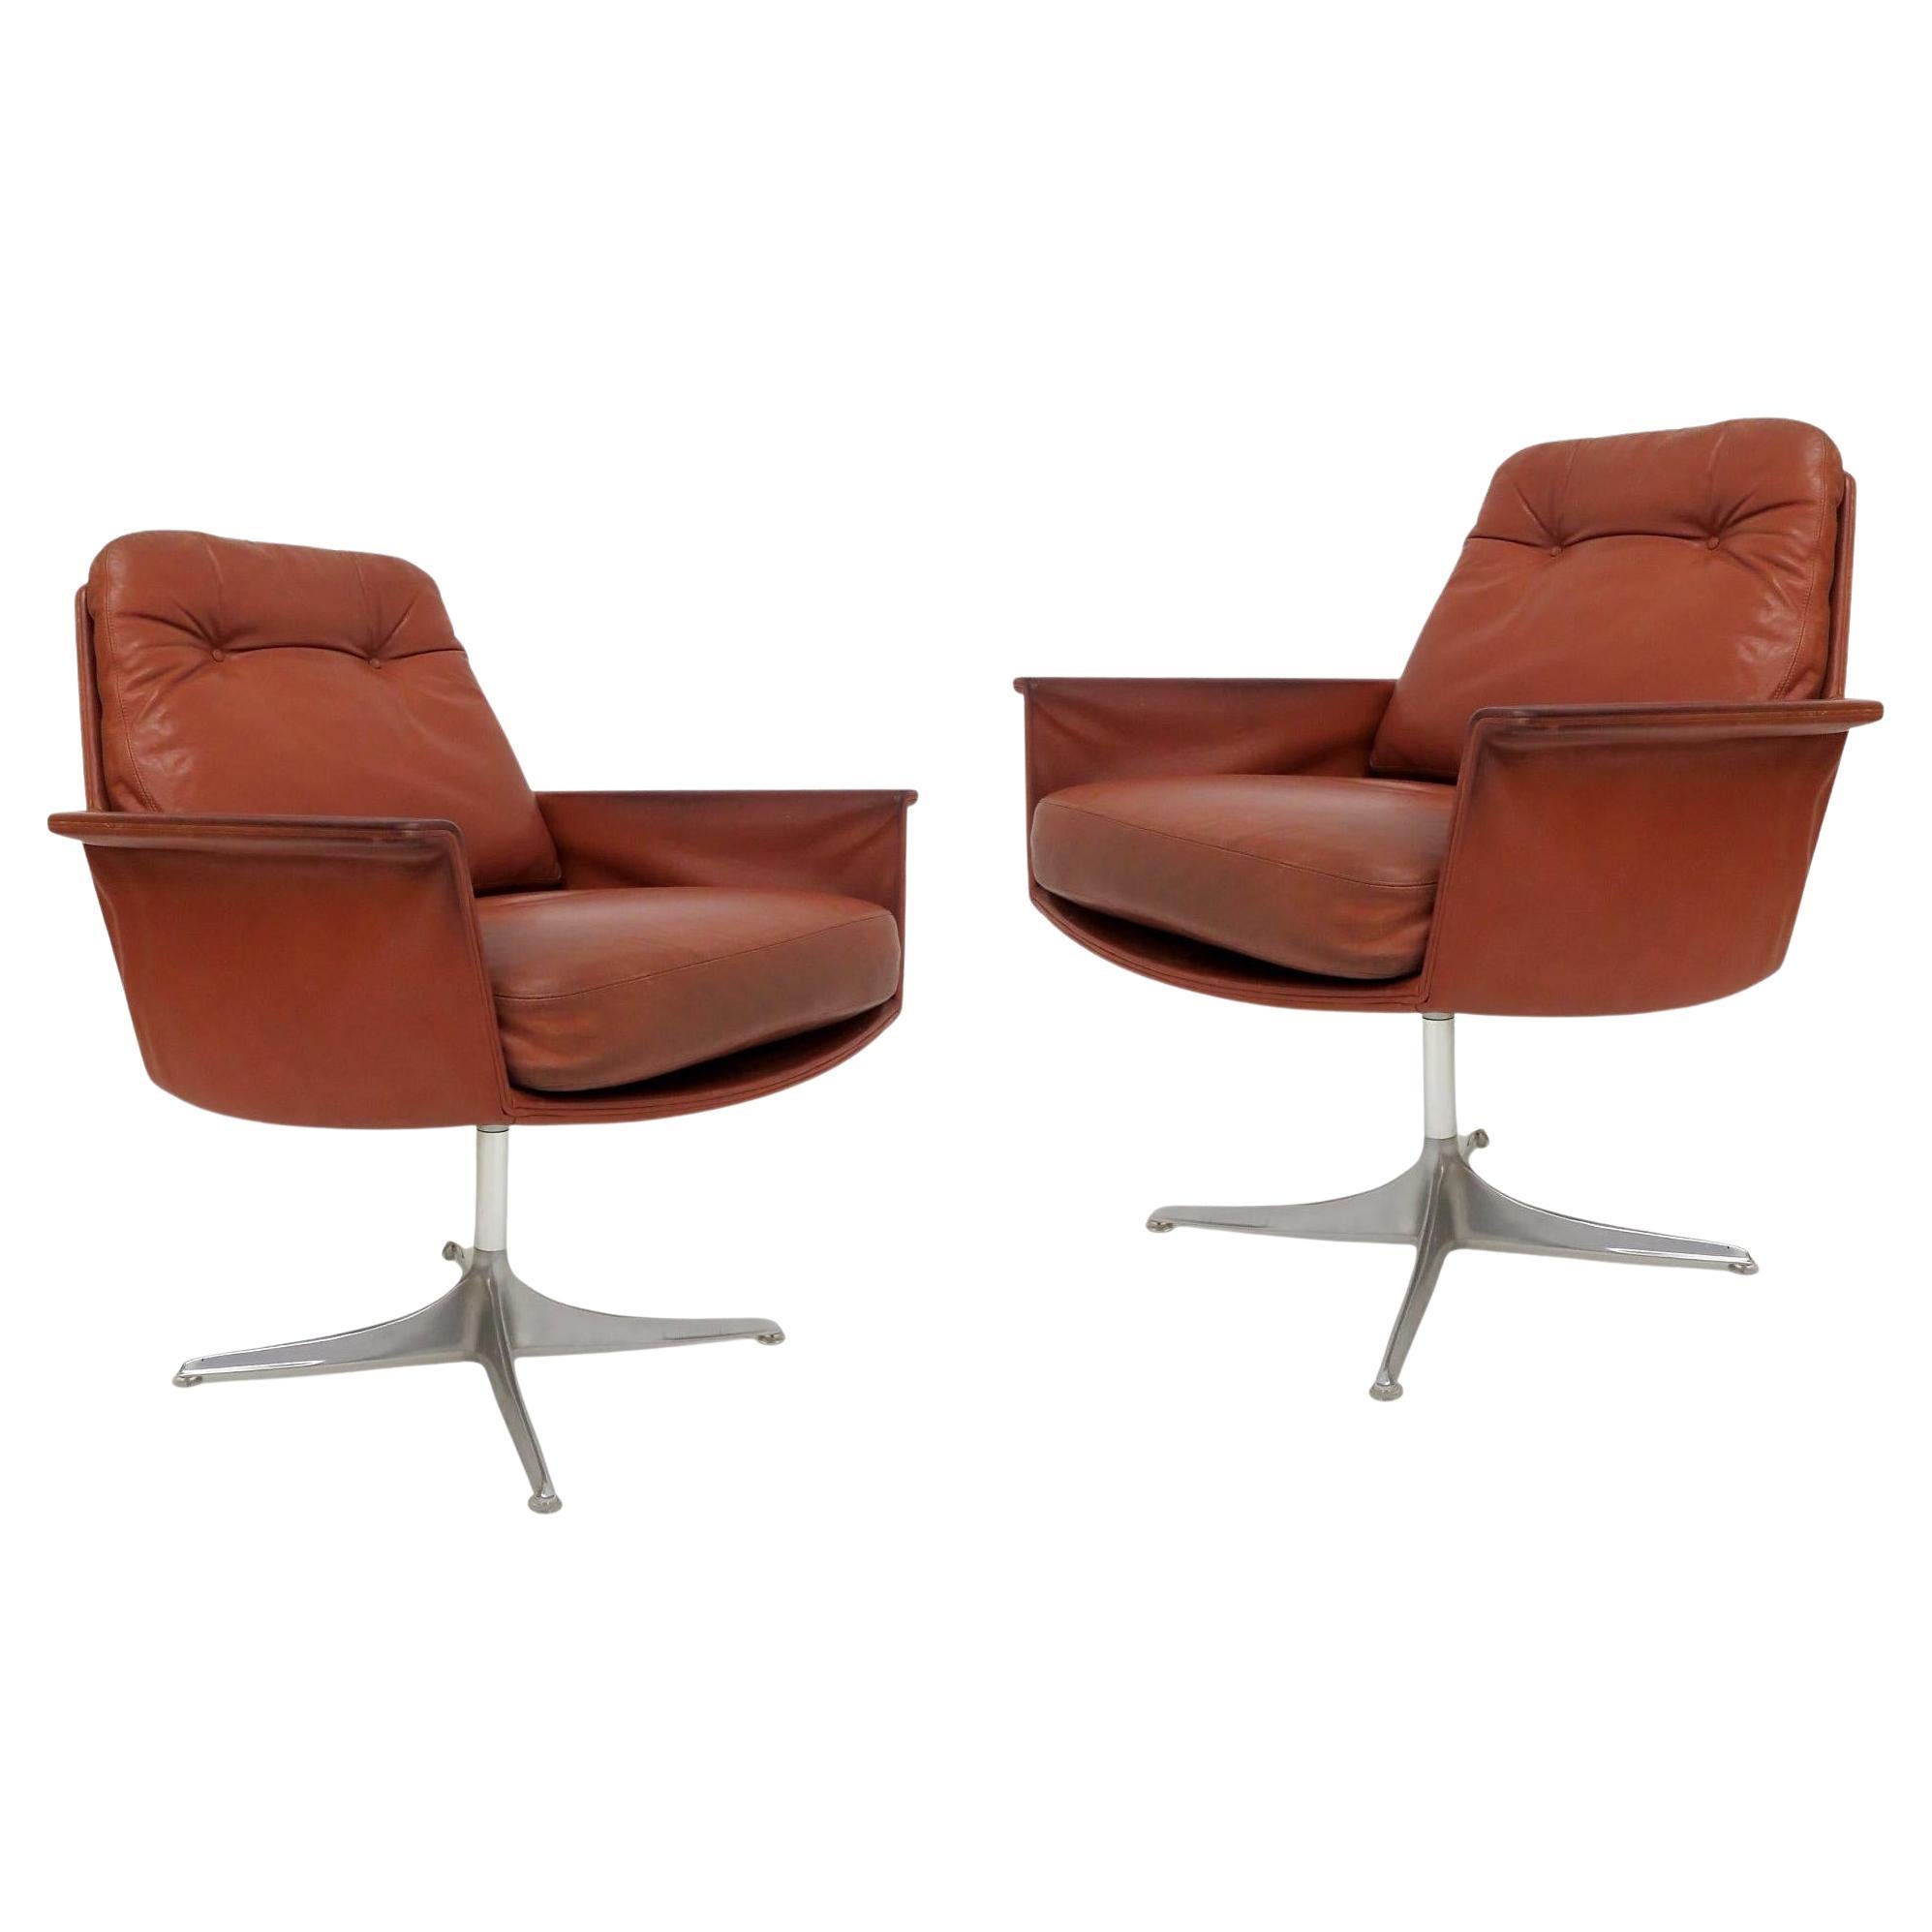 Pair of Horst Brüning Sedia Lounge Chairs for Kill International, 1960s For Sale